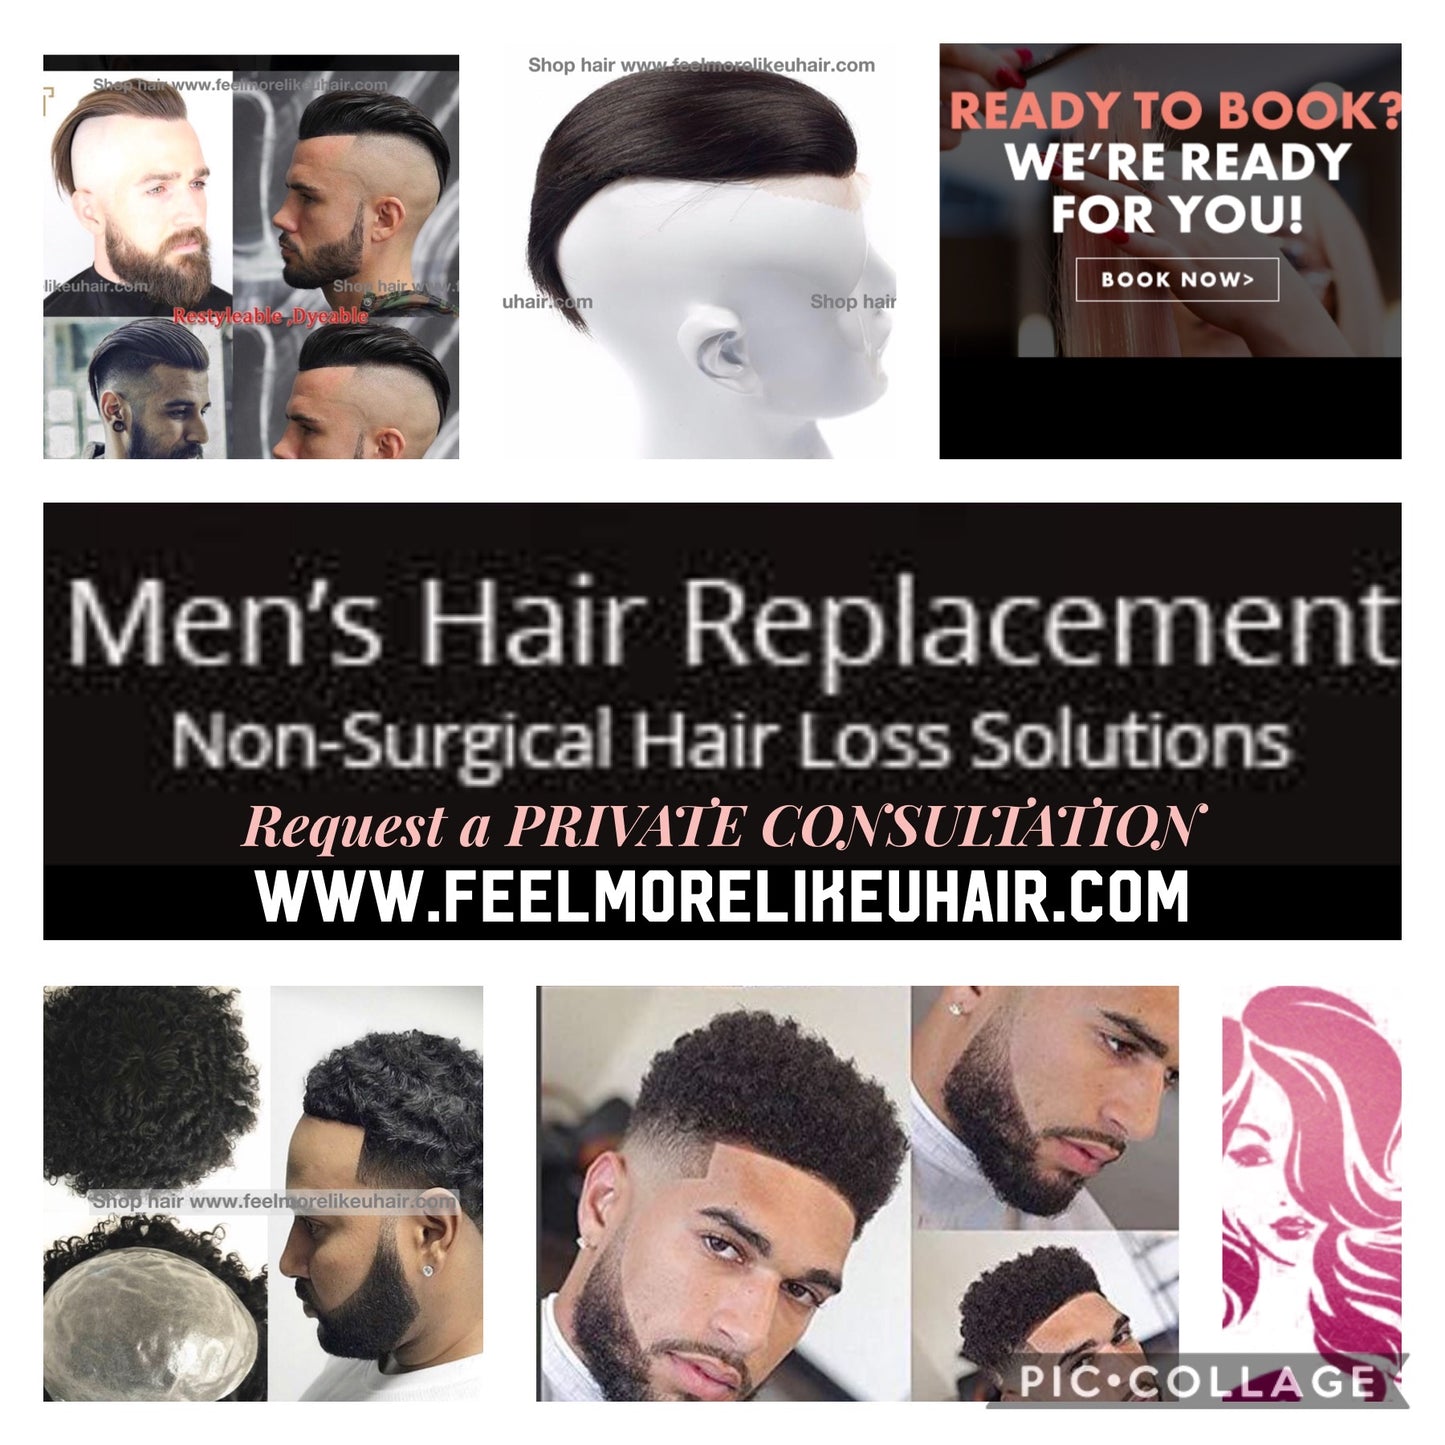 Hair Loss & Hair Replacement Solutions | Get A Private 1-on-1 Consultation